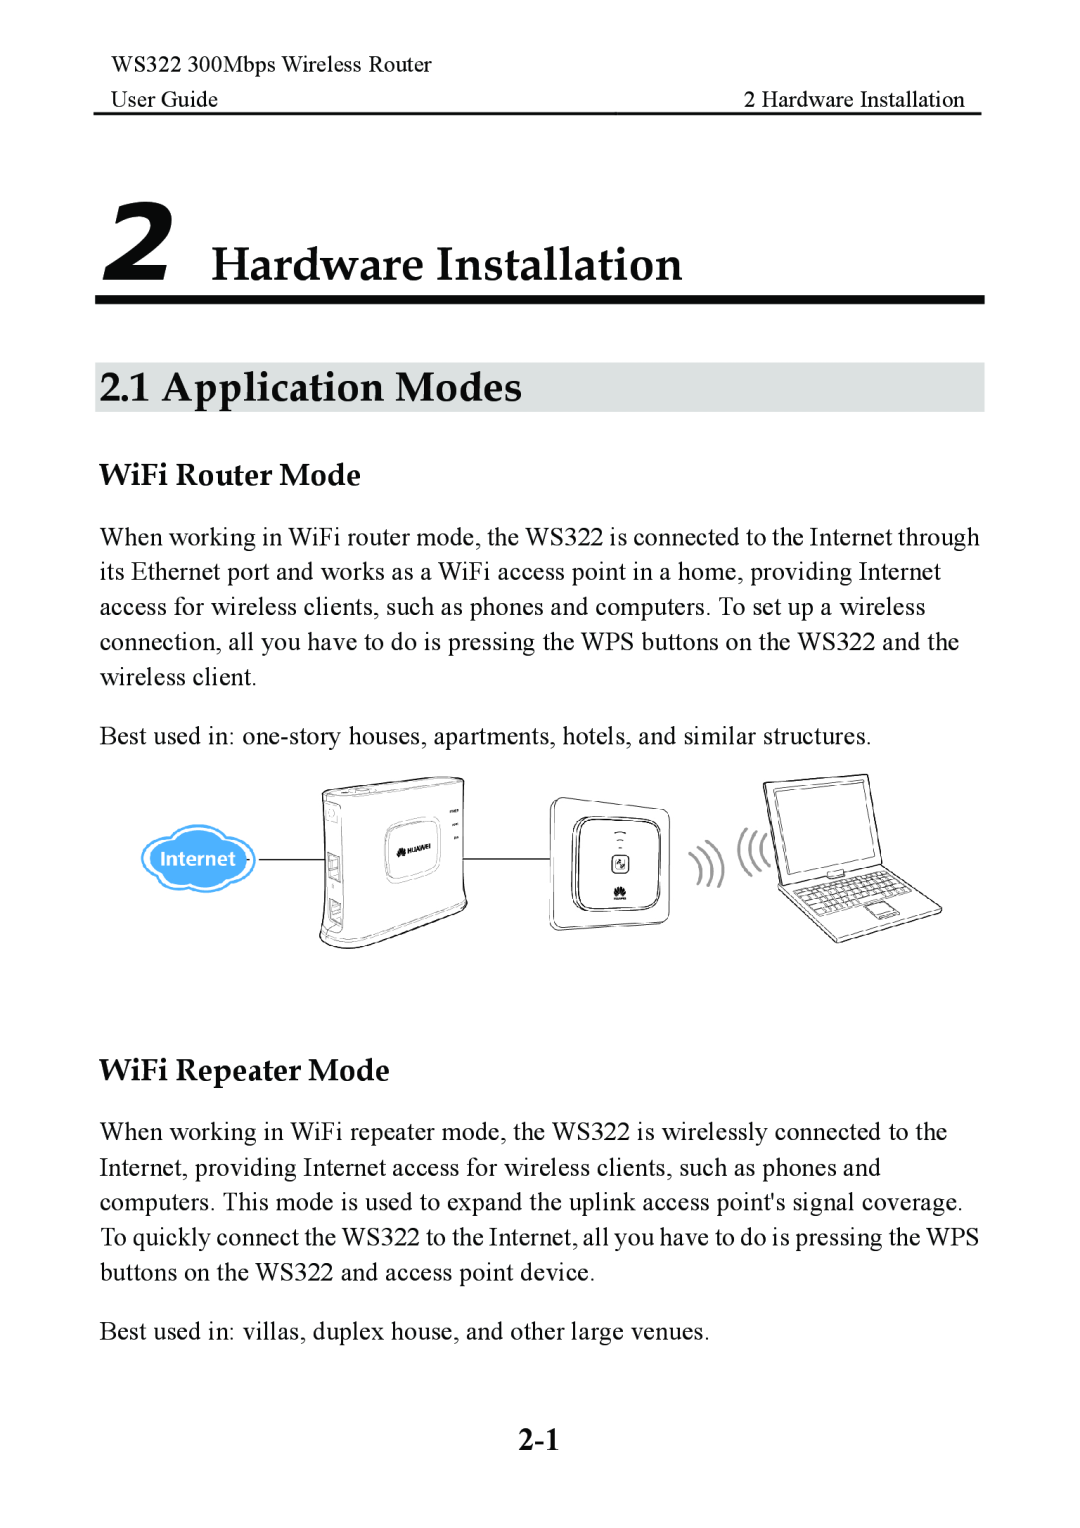 Huawei WS322 manual Hardware Installation, Application Modes, WiFi Router Mode, WiFi Repeater Mode 